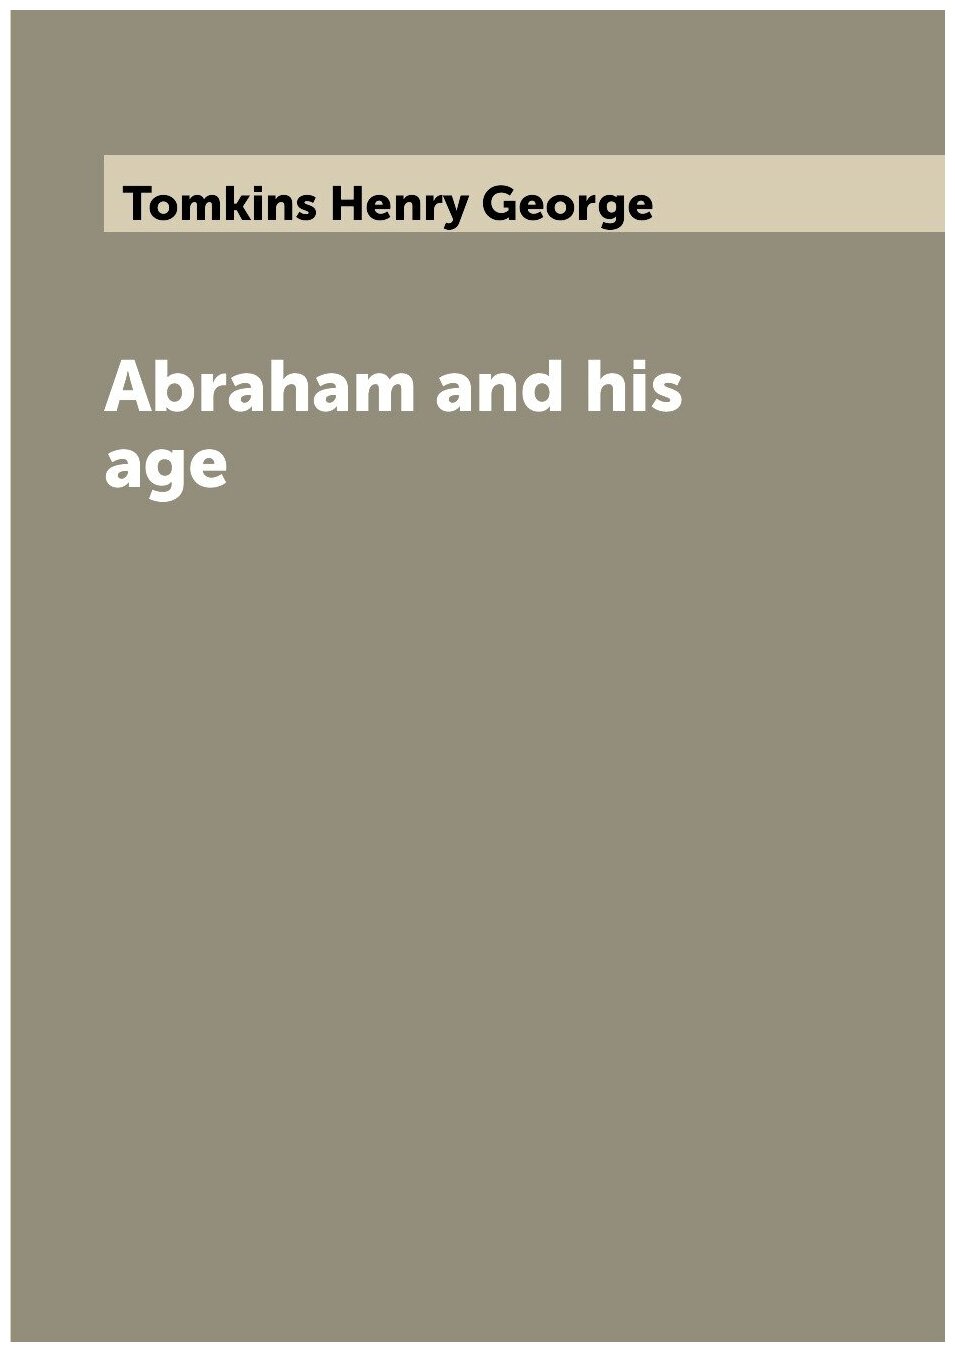 Abraham and his age